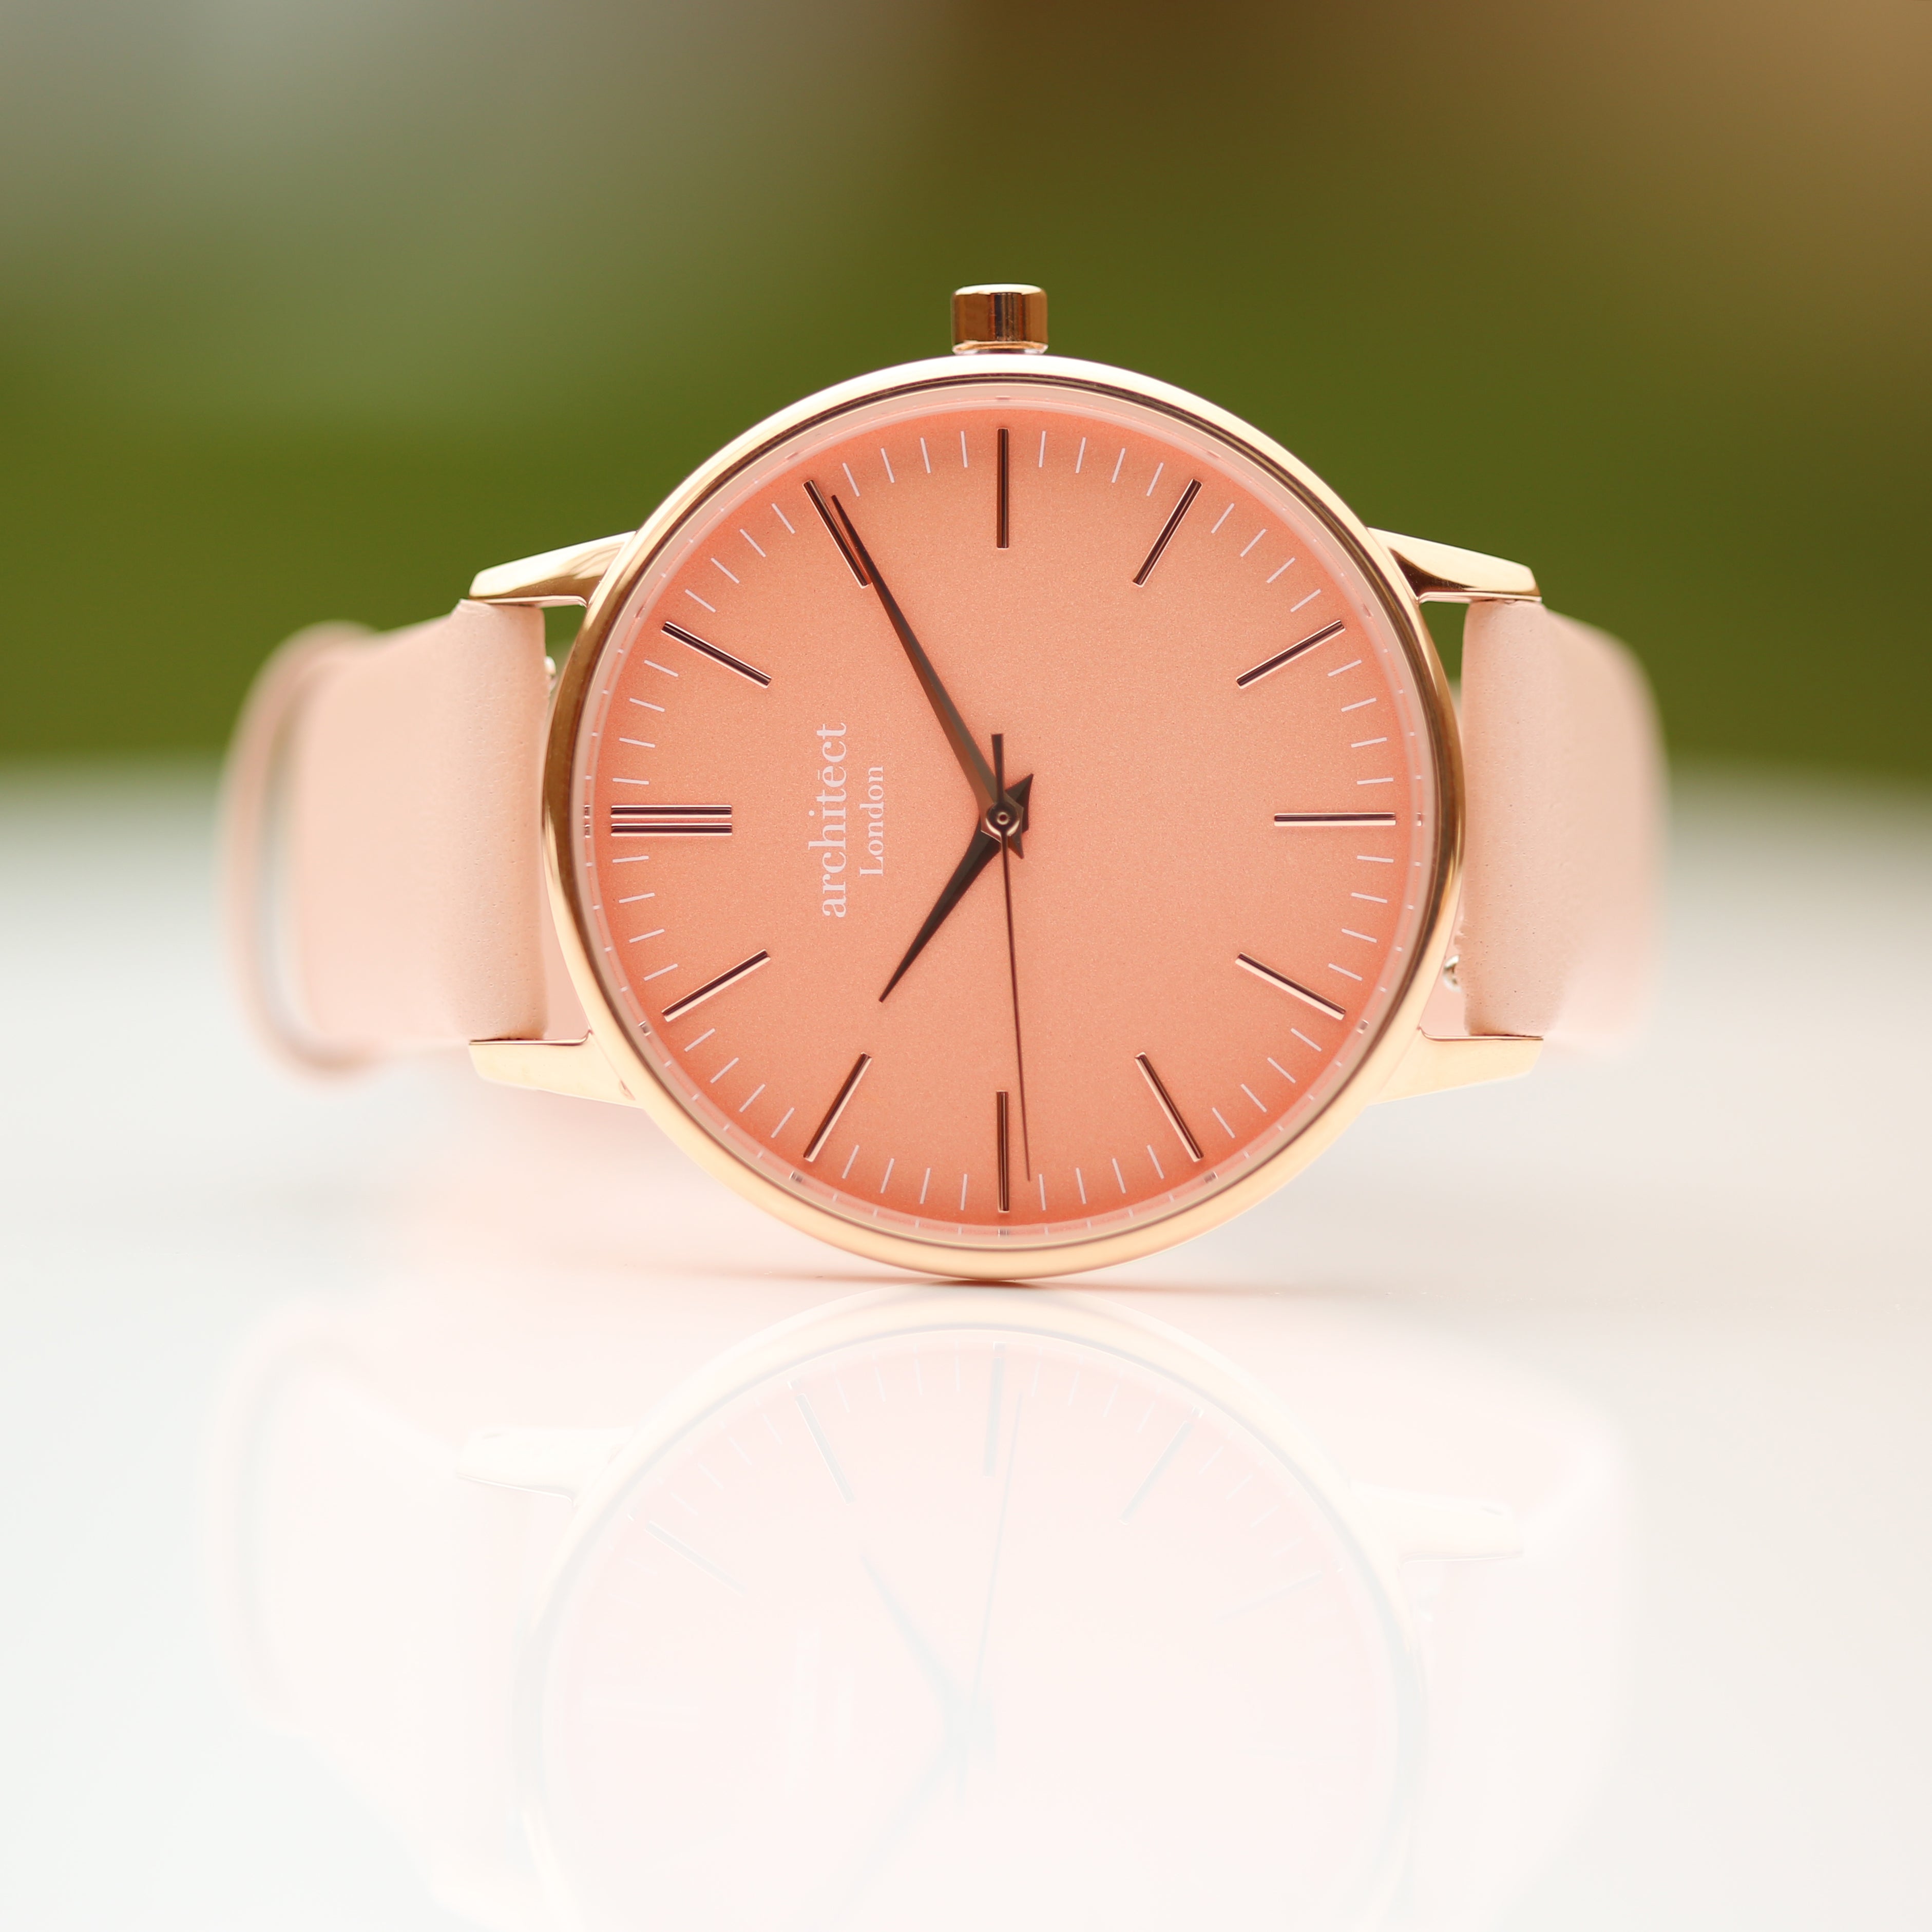 Contactless Payment Watch - Ladies Architēct Coral + Light Pink Strap + Own Handwriting Engraving